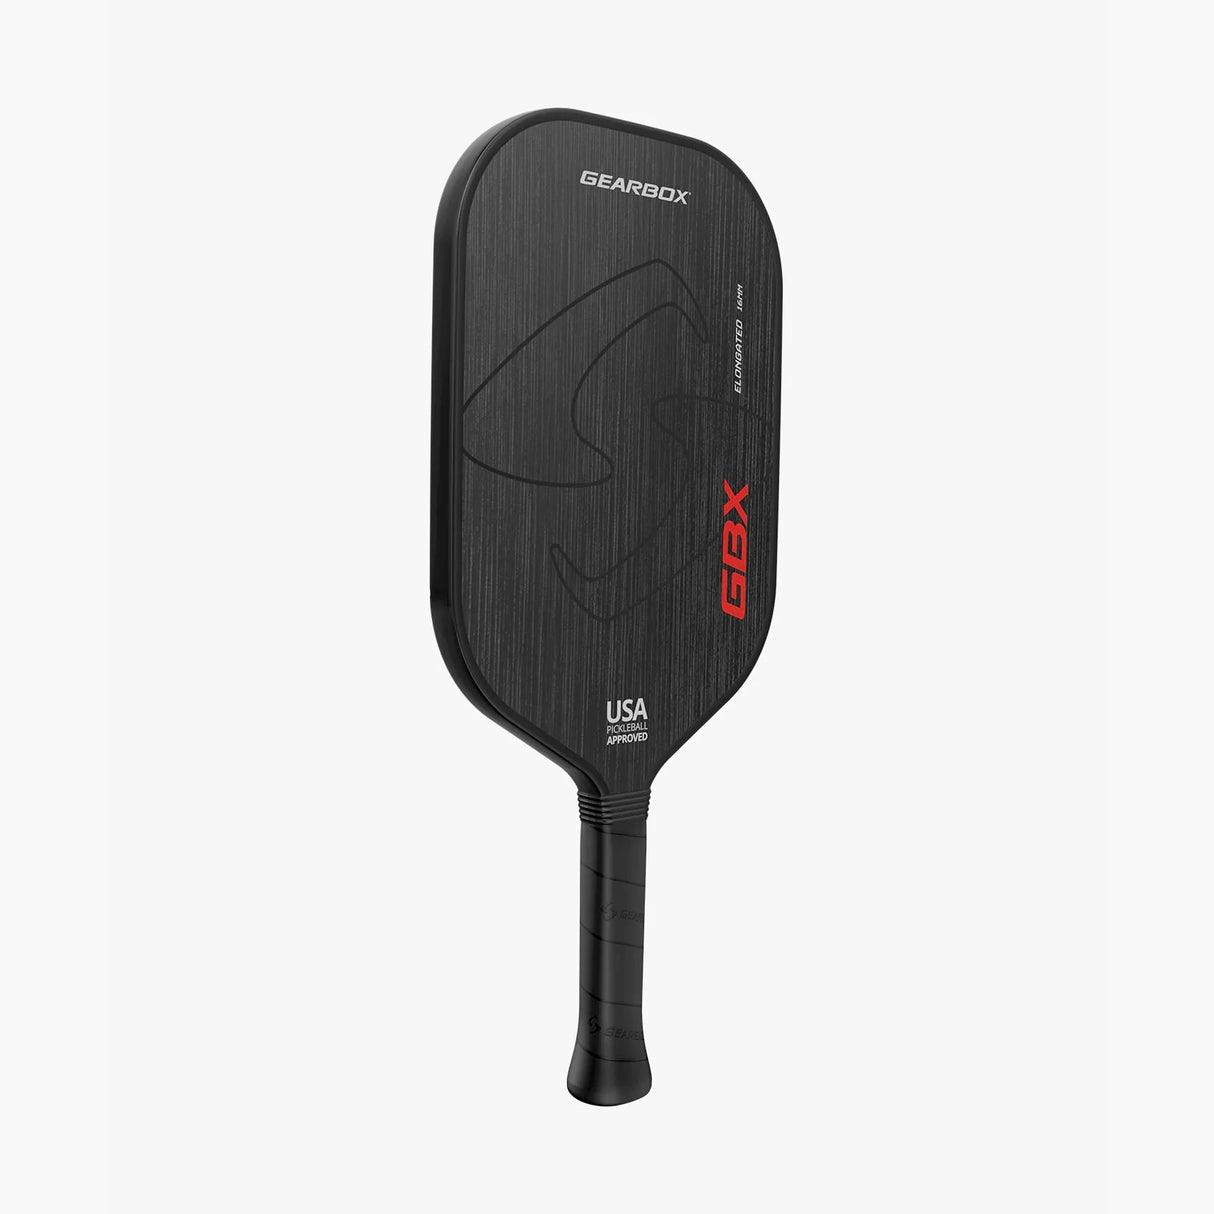 Gearbox GBX Elongated Pickelball Paddle